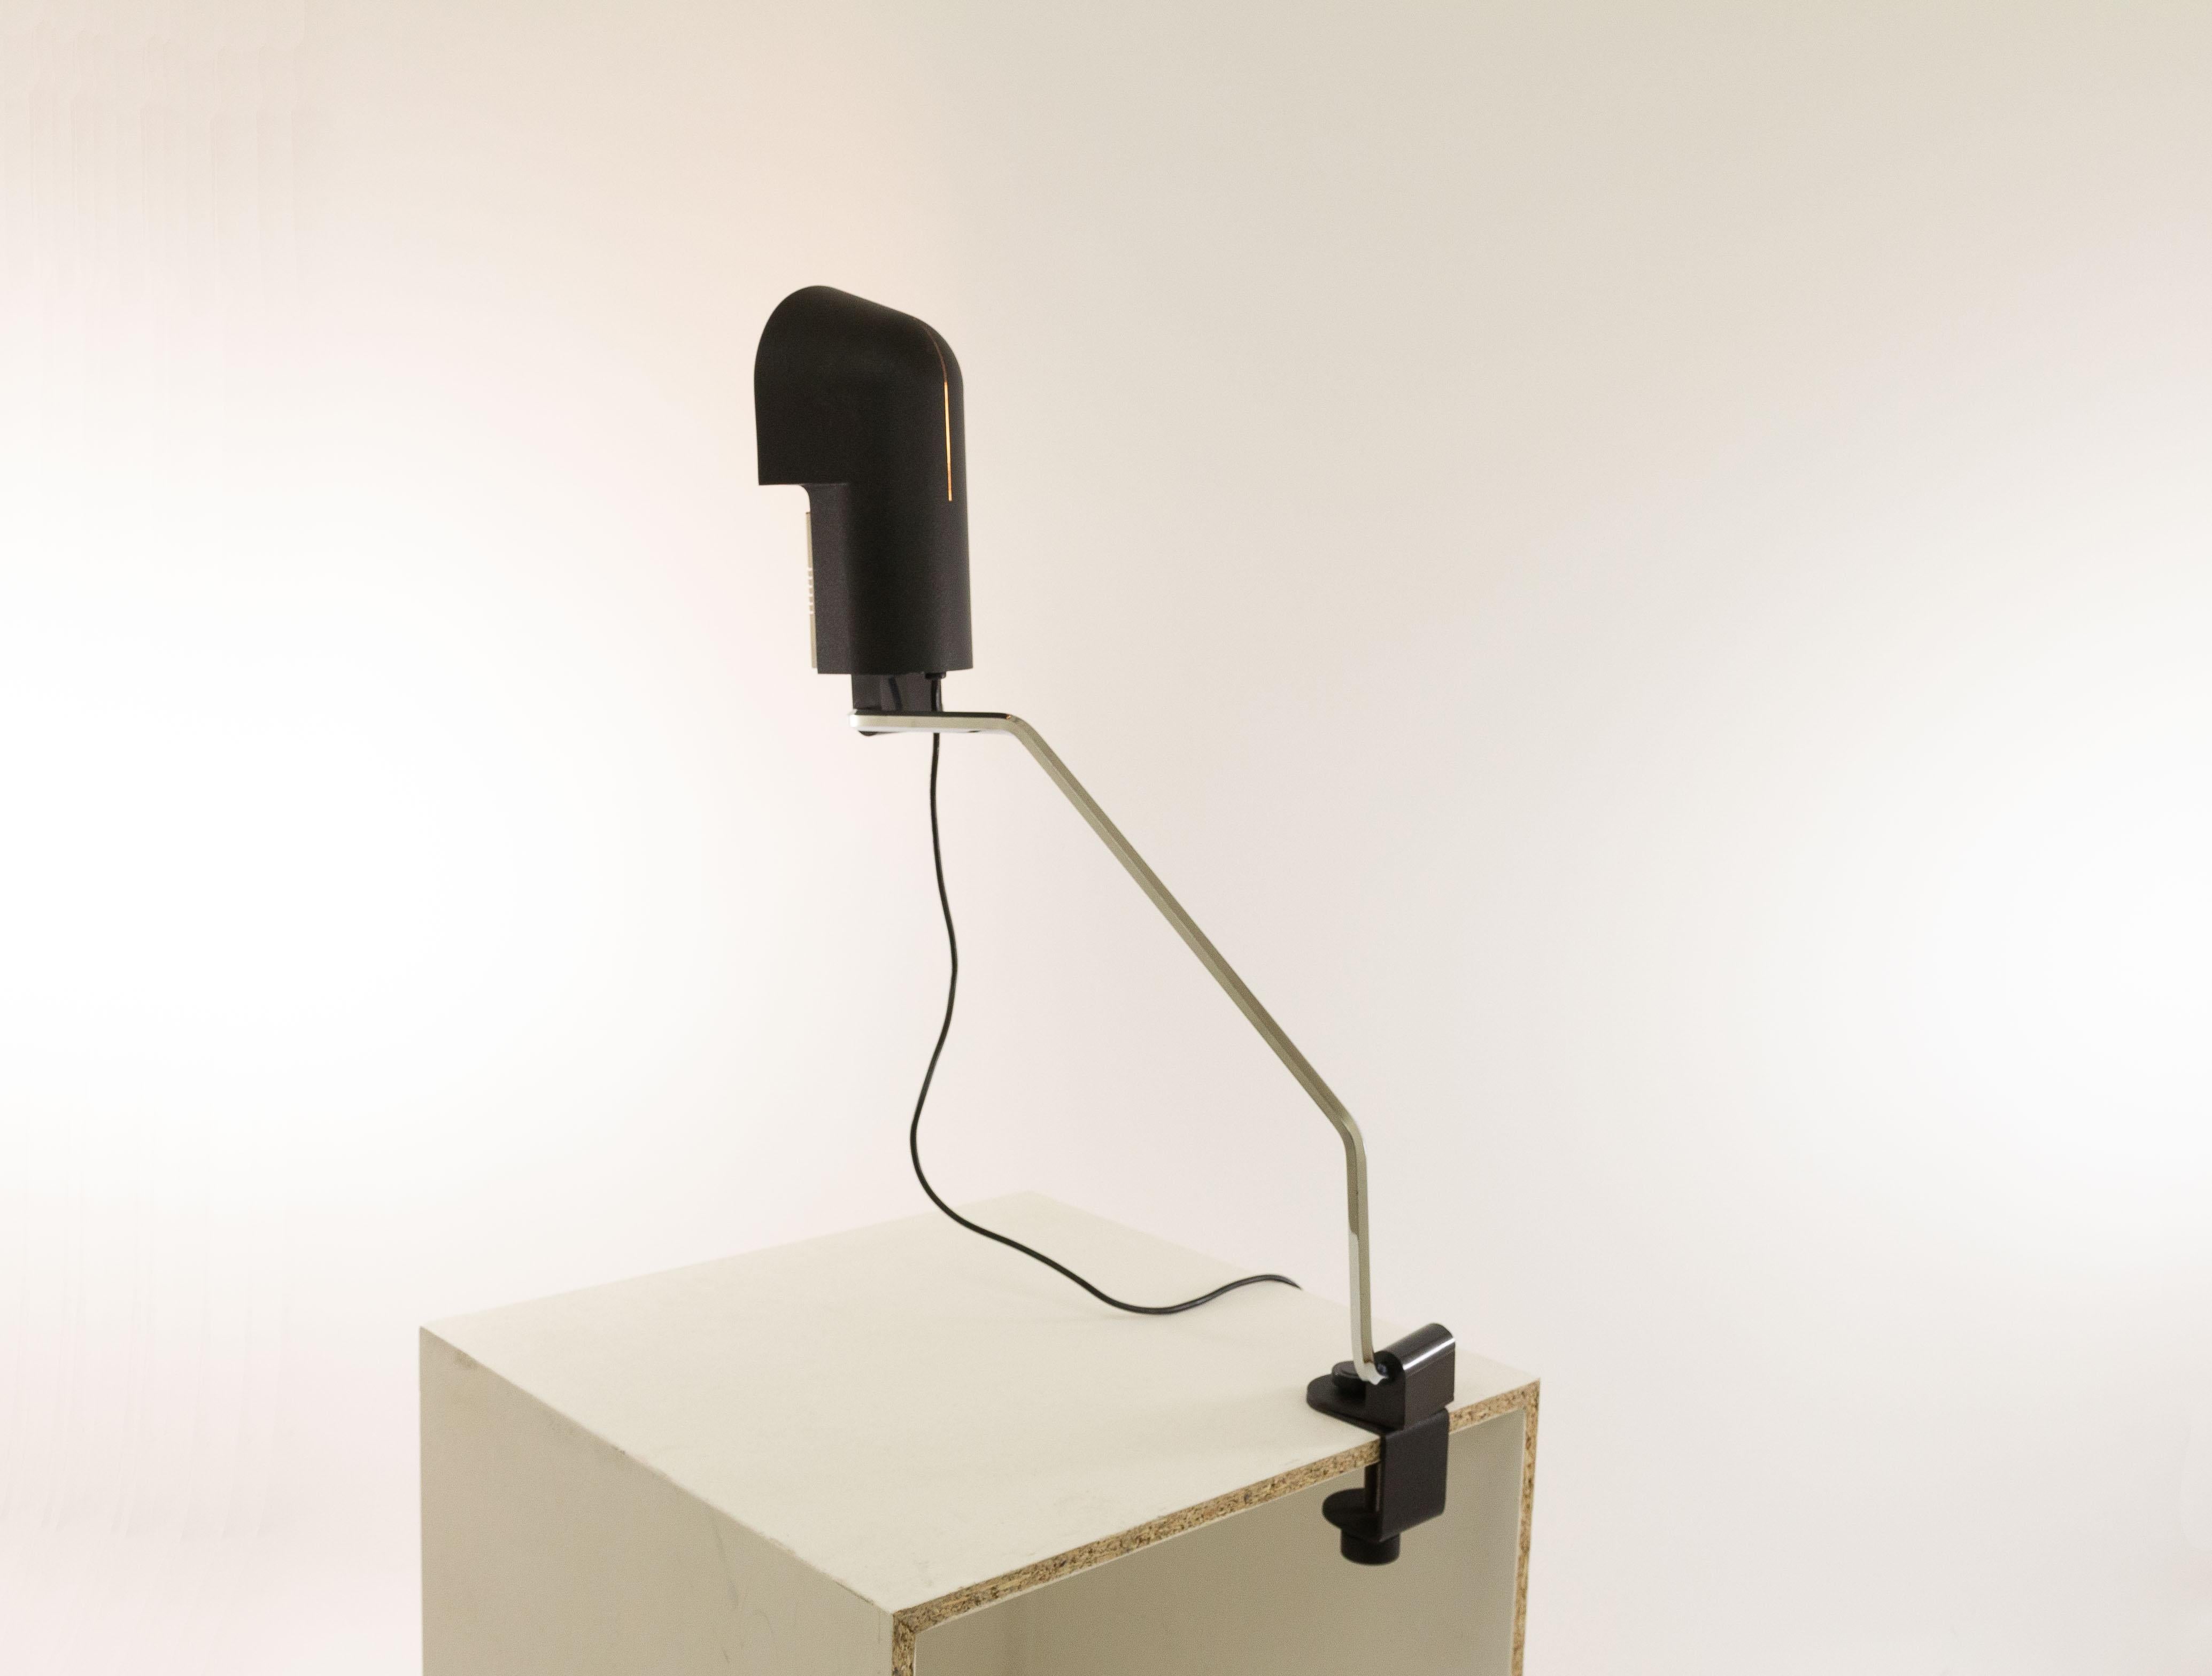 Lacquered Black Pala Clamp Table Lamp by Corrado and Luigi Aroldi for Luci, 1970s For Sale